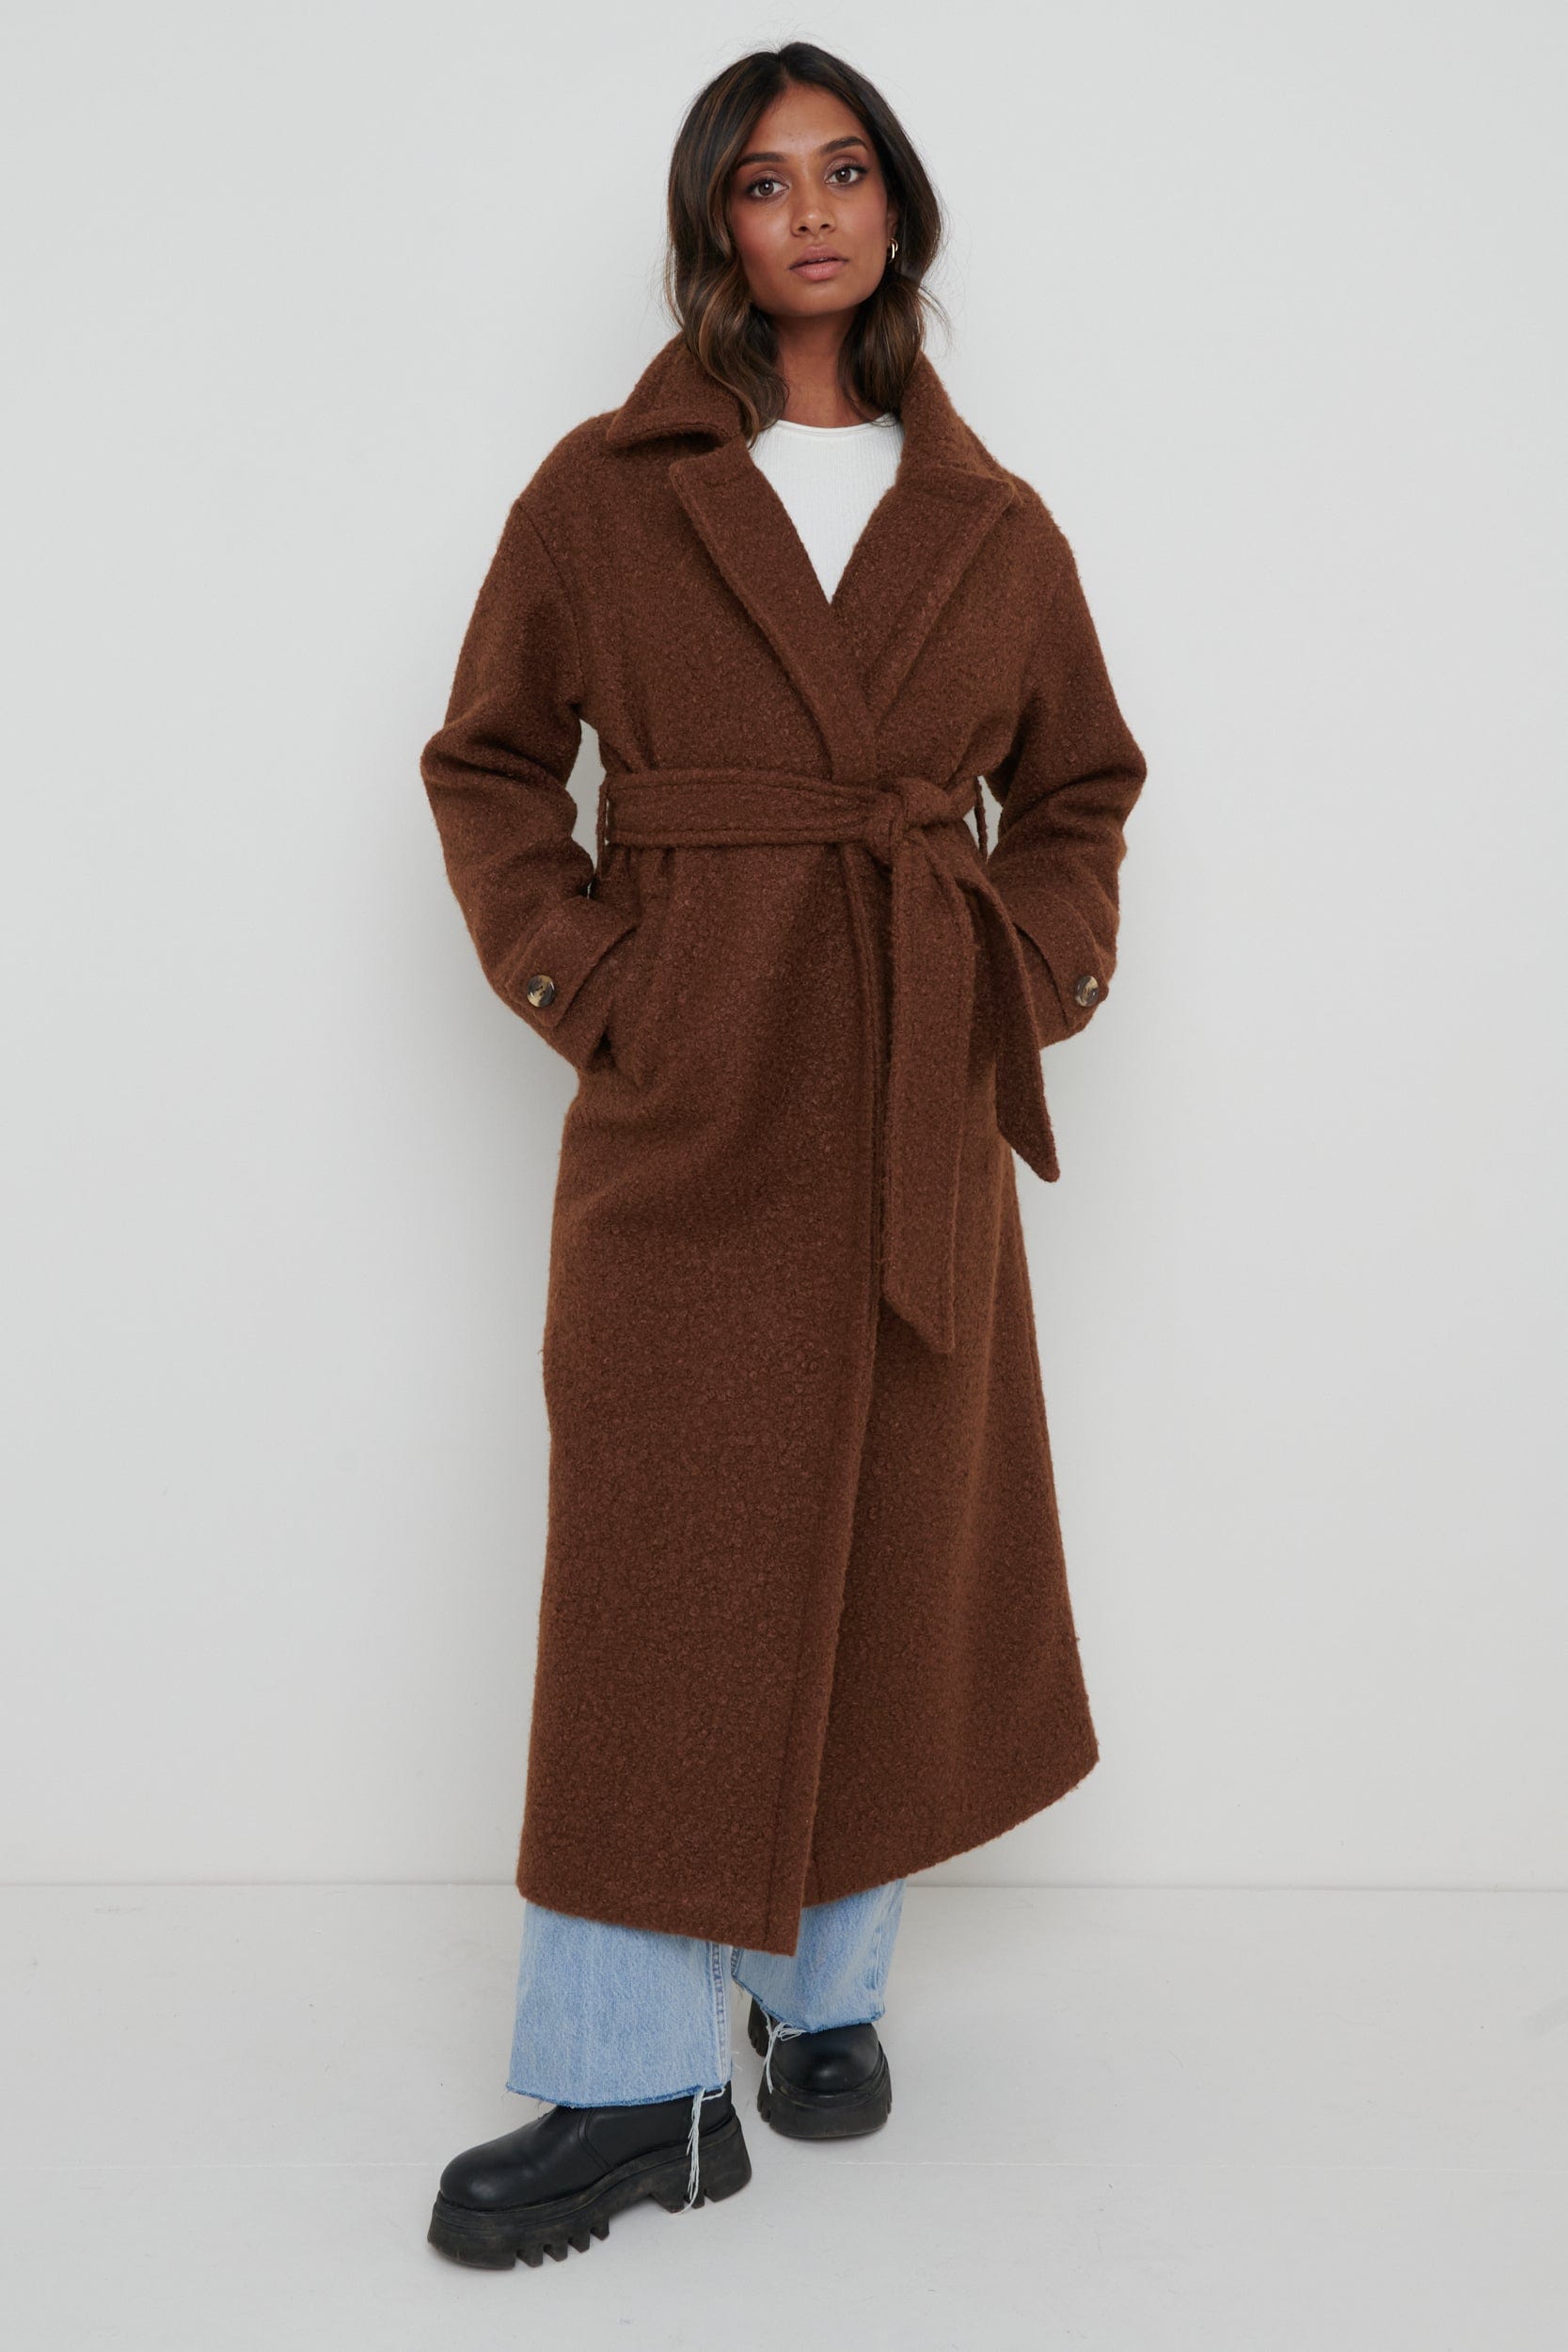 Grayson Boucle Oversized Coat - Brown, S